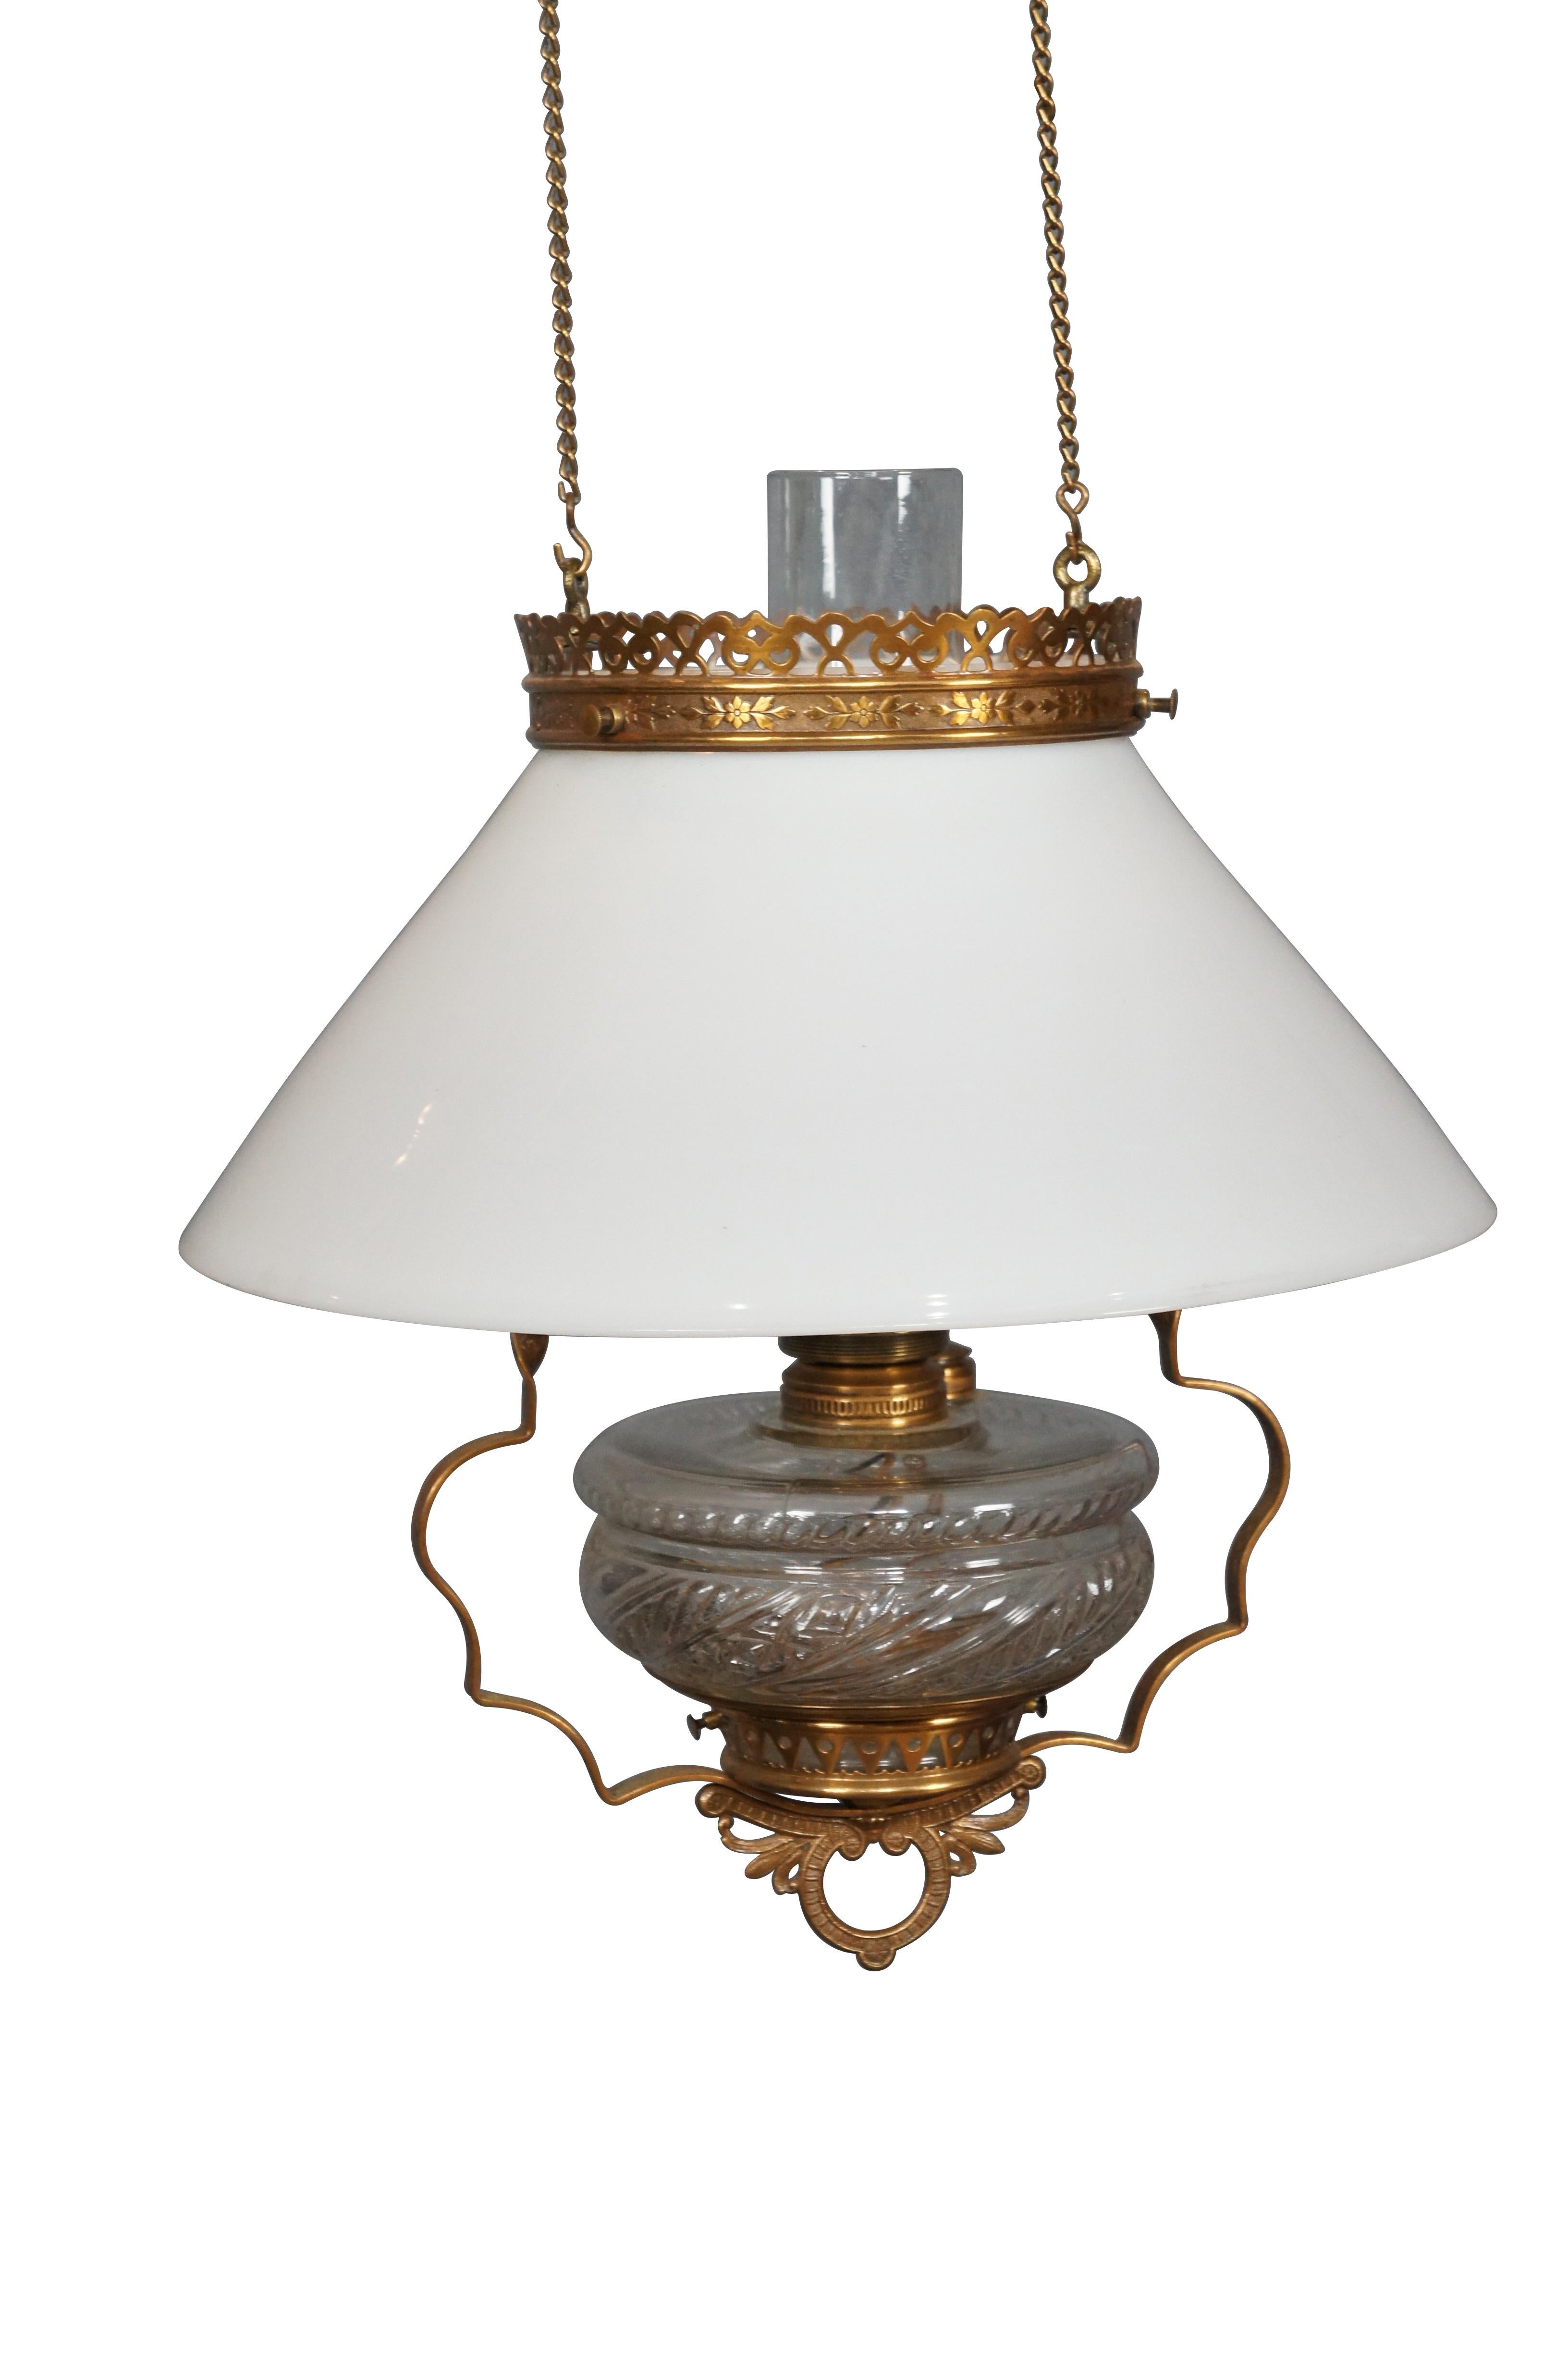 Antique late 19th century Aesthetic Movement cieling mounted parlor light / chandelier featuring pierced brass design with pressed glass oil reservoir, milk glass shade, clear hurricane and brass smoke bell. Suspends from cieling mount with two